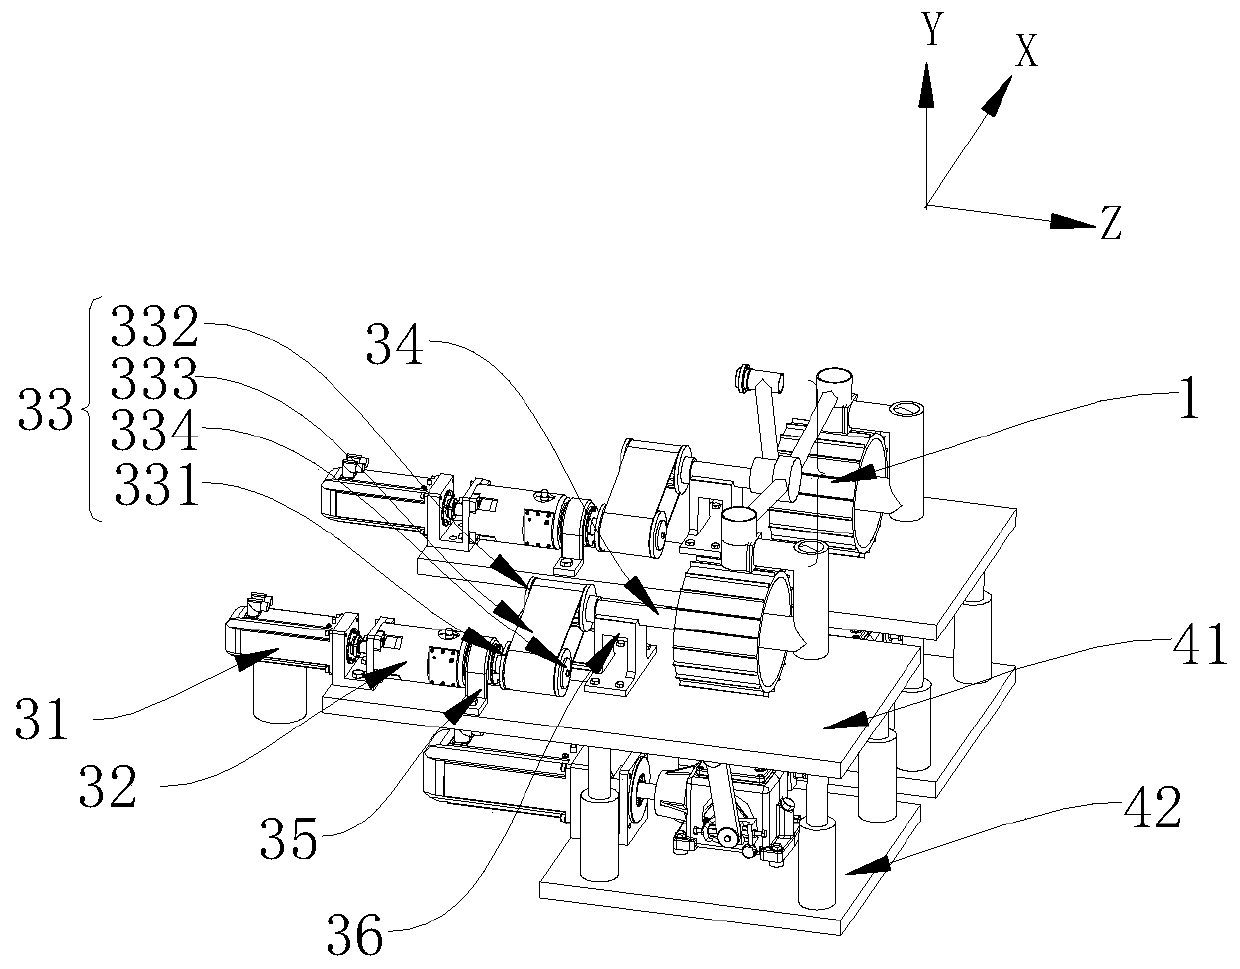 Mars rover moving system vibration loading mechanism and performance testing device